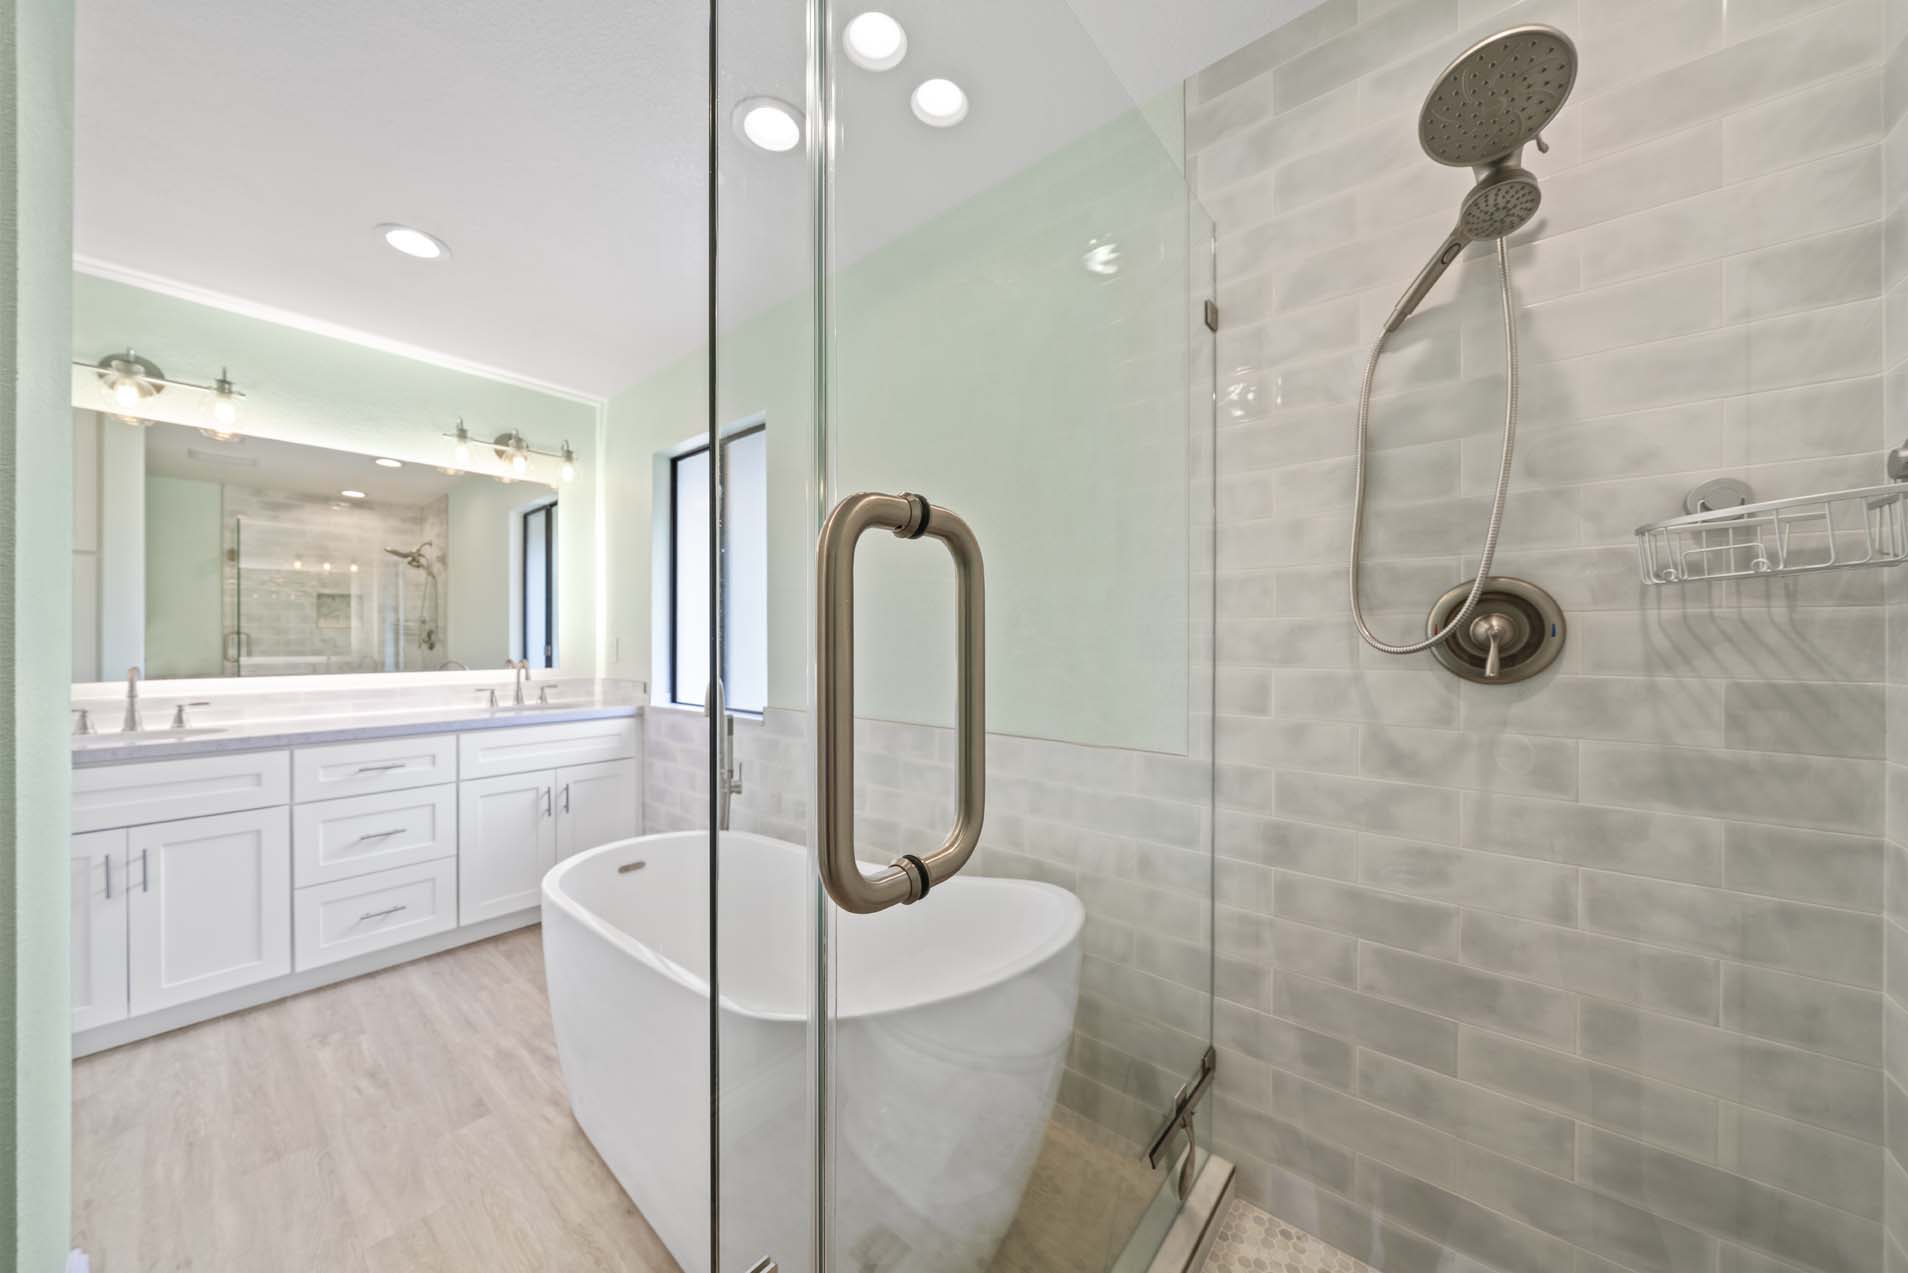 Bathroom remodeling in Rocklin, California 95677 by Luxehome Construction Inc.